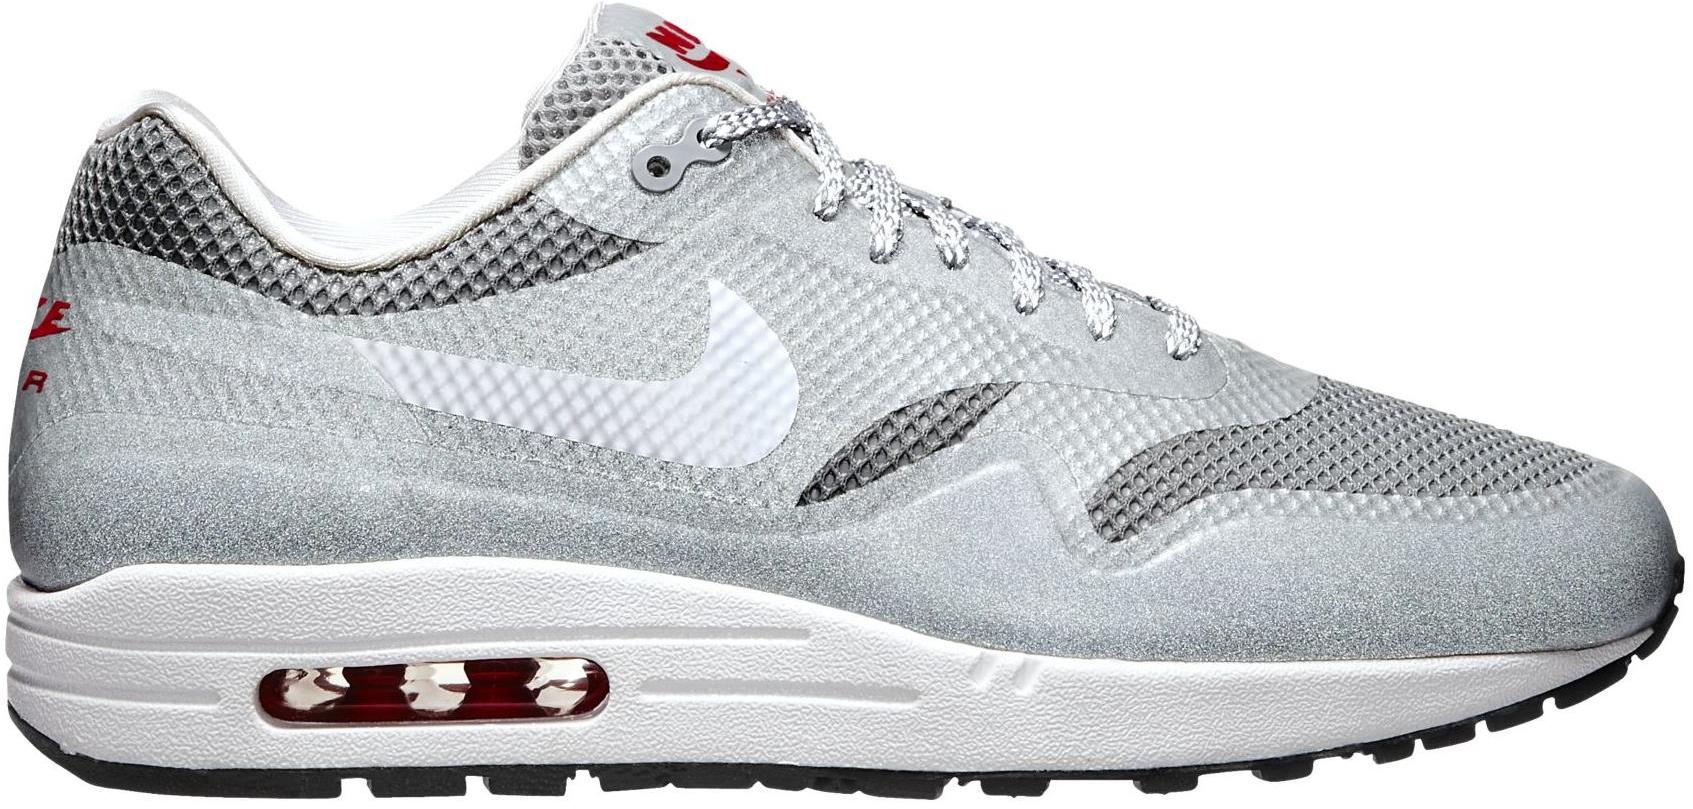 Nike Air Max 1 Hyperfuse Matte Silver Men's - 543213-016 - US